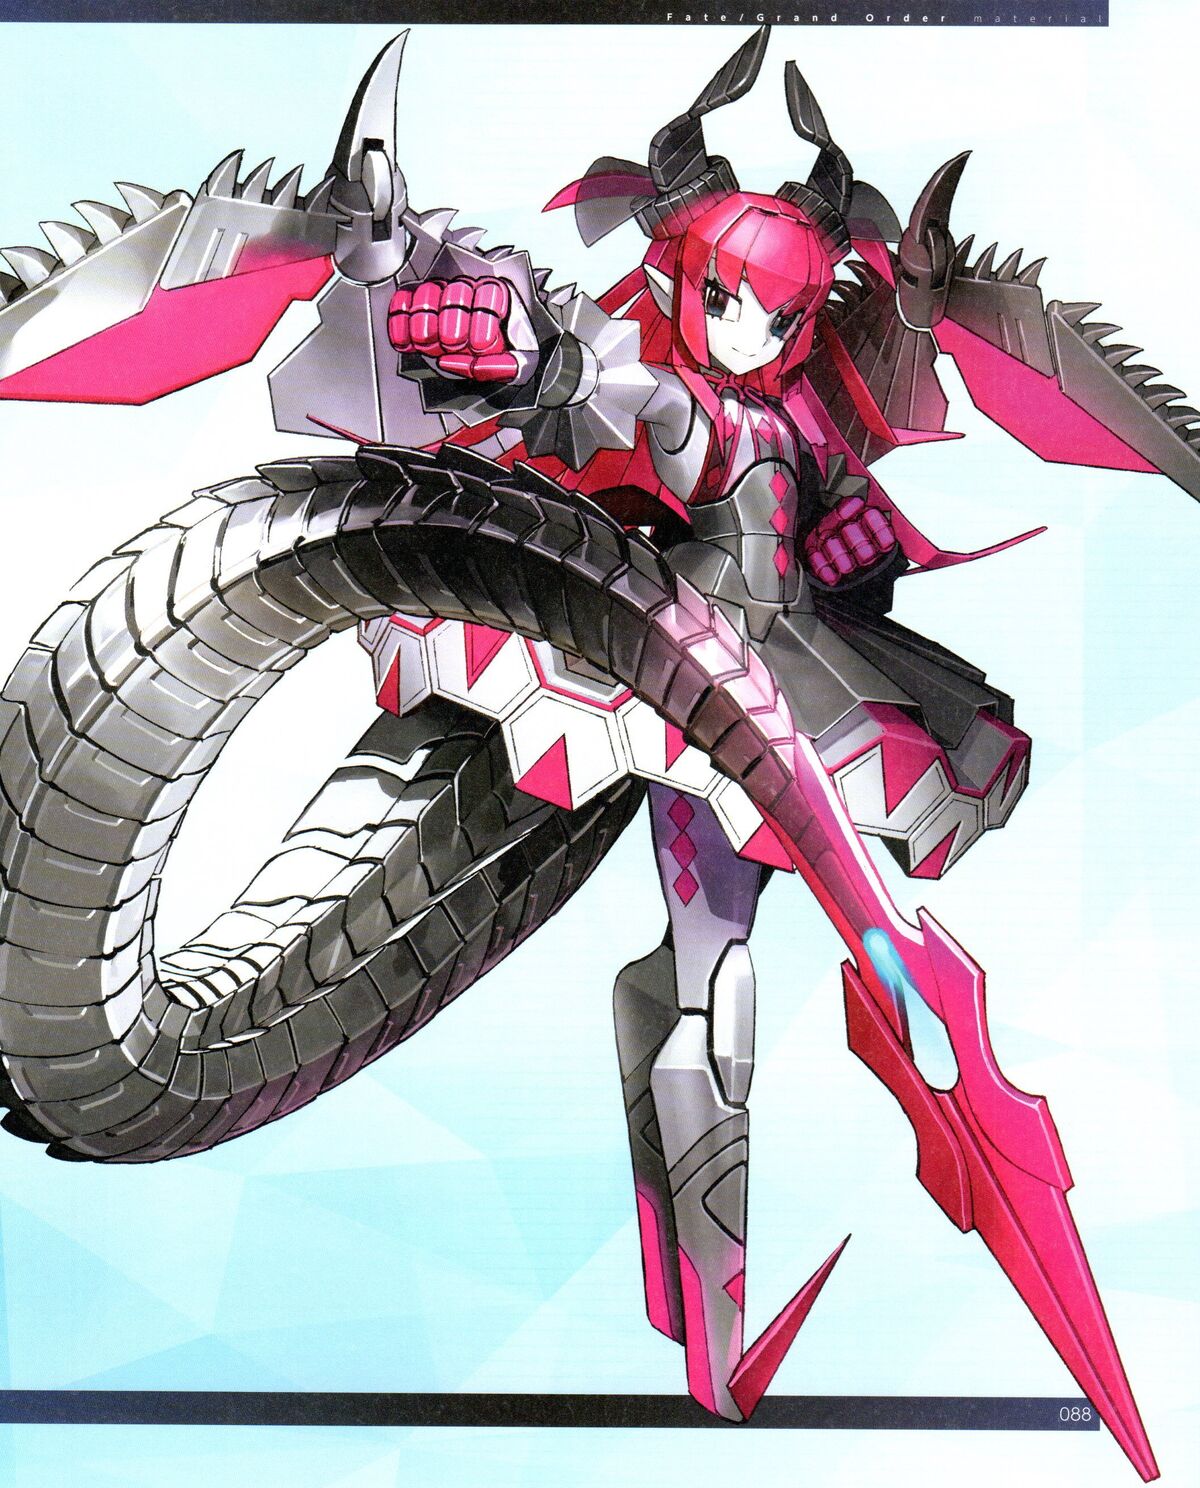 Mecha Girl Of The Day* on X: Next Mecha Girl of the day is